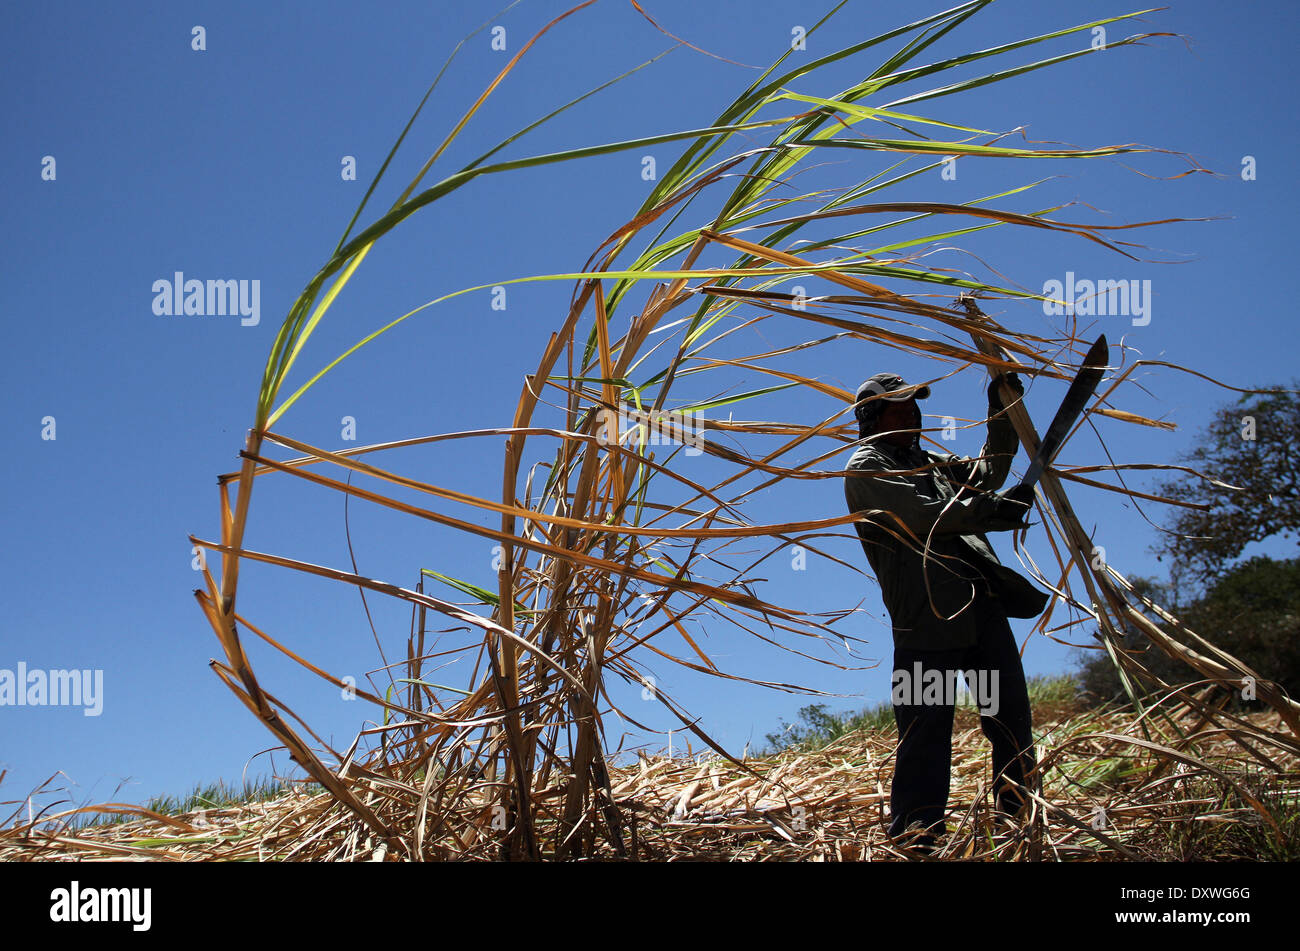 San Ramon, Costa Rica. 31st Mar, 2014. A worker reaps sugarcane in a plantation of San Ramon district, 55km from San Jose, capital of Costa Rica, on March 31, 2014. Sugar industry is one of the most important industries in Costa Rica, with over 48,000 hectares of planted sugarcane. © Kent Gilbert/Xinhua/Alamy Live News Stock Photo